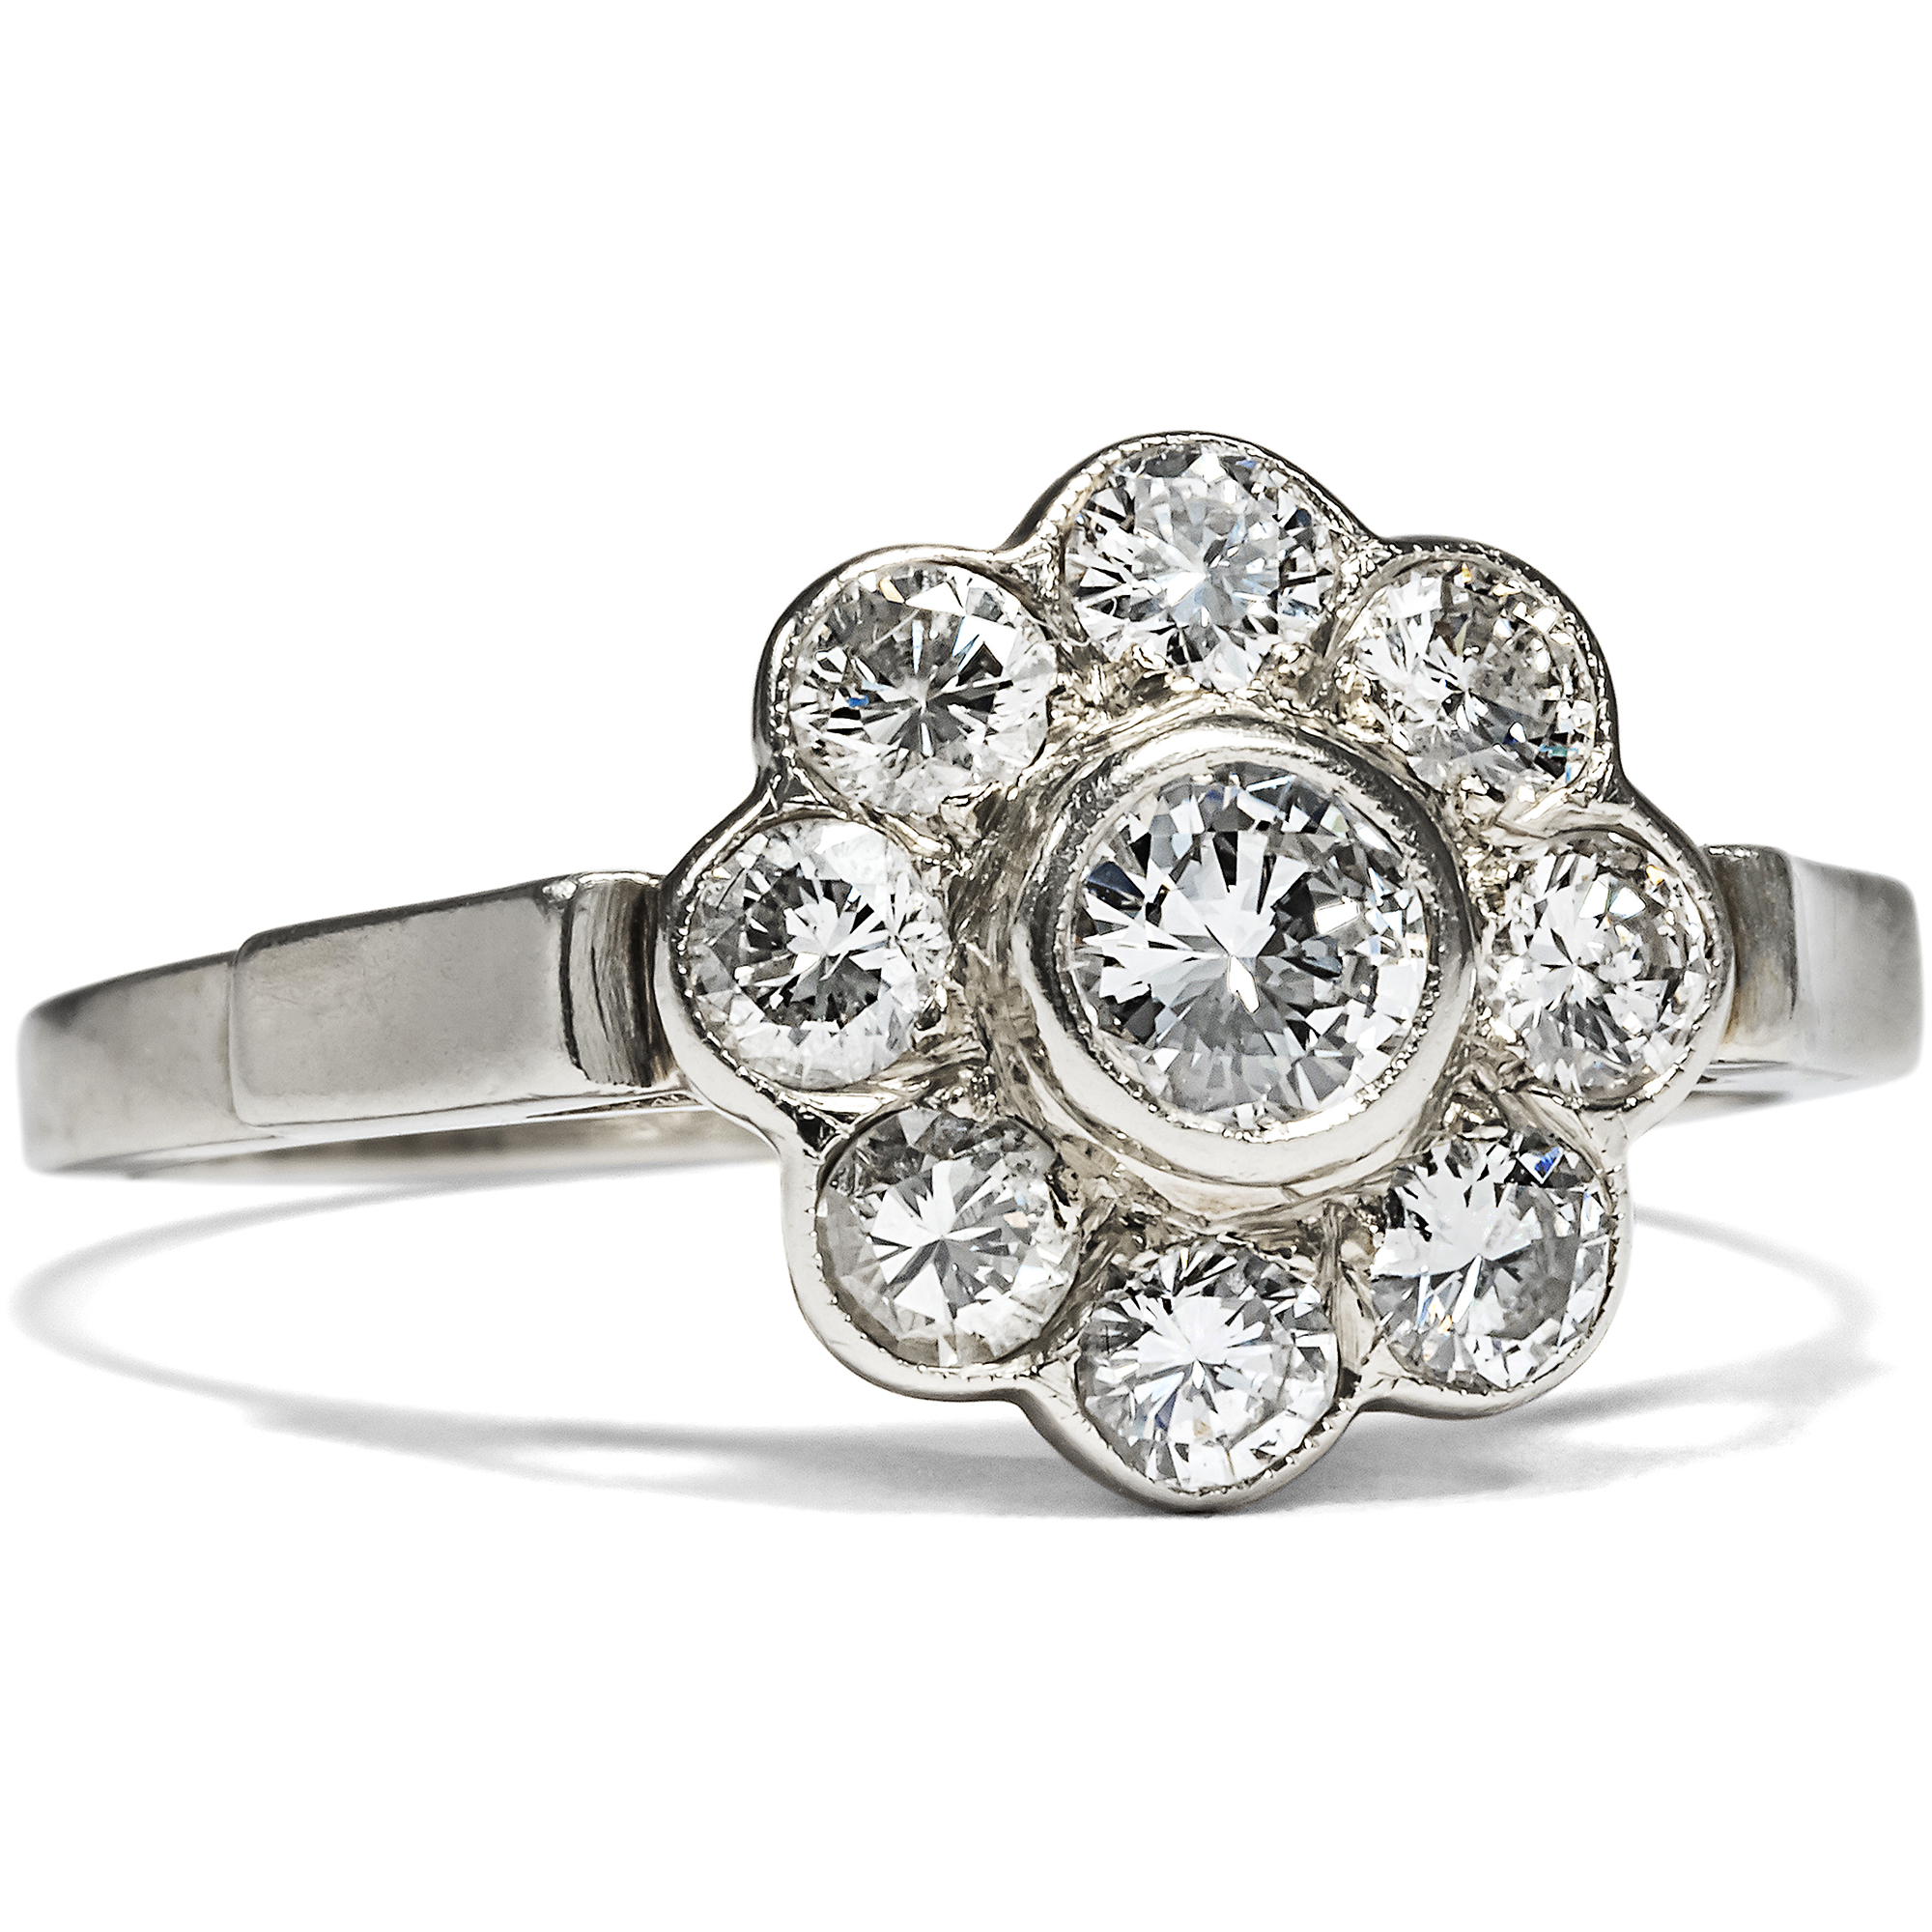 Delicate "Daisy" ring with diamonds in white gold, Vienna around 1950